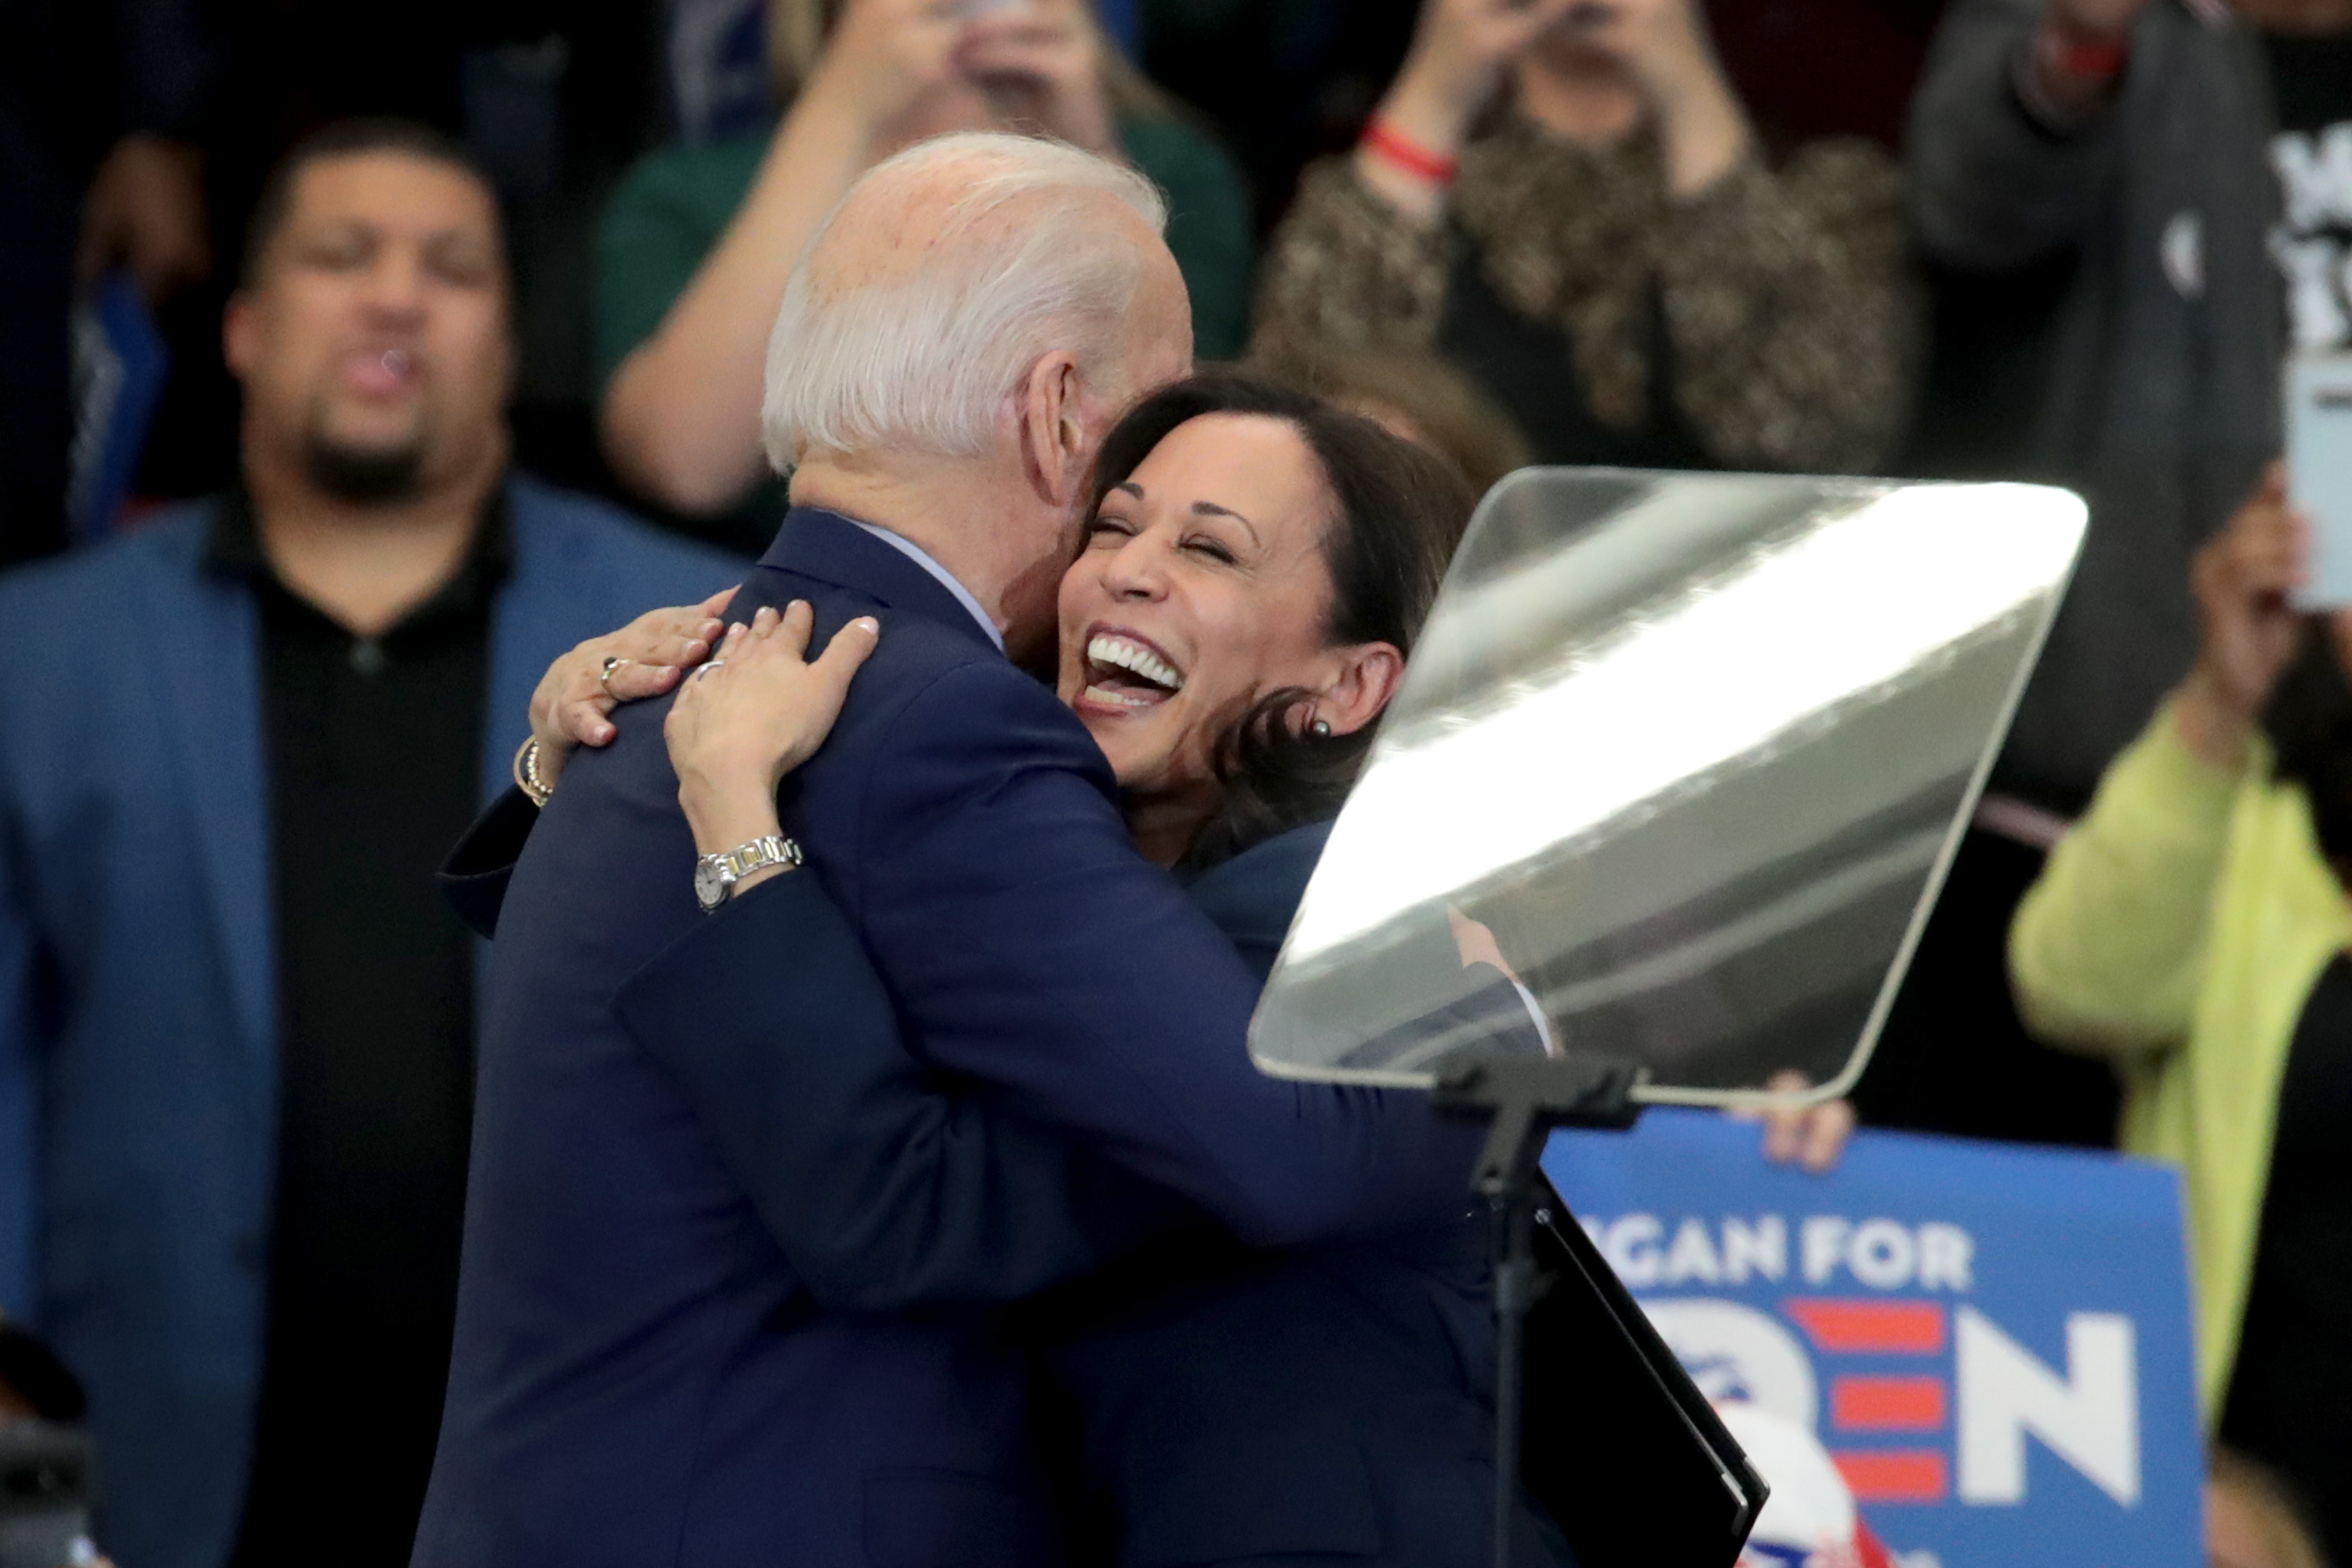 DETROIT, MICHIGAN - MARCH 09: Sen. Kamala Harris (L) (D-CA), hugs Democratic presidential candidate former Vice President Joe Biden after introducing him at a campaign rally at Renaissance High School on March 09, 2020 in Detroit, Michigan. Michigan will hold its primary election tomorrow. (Photo by Scott Olson/Getty Images)